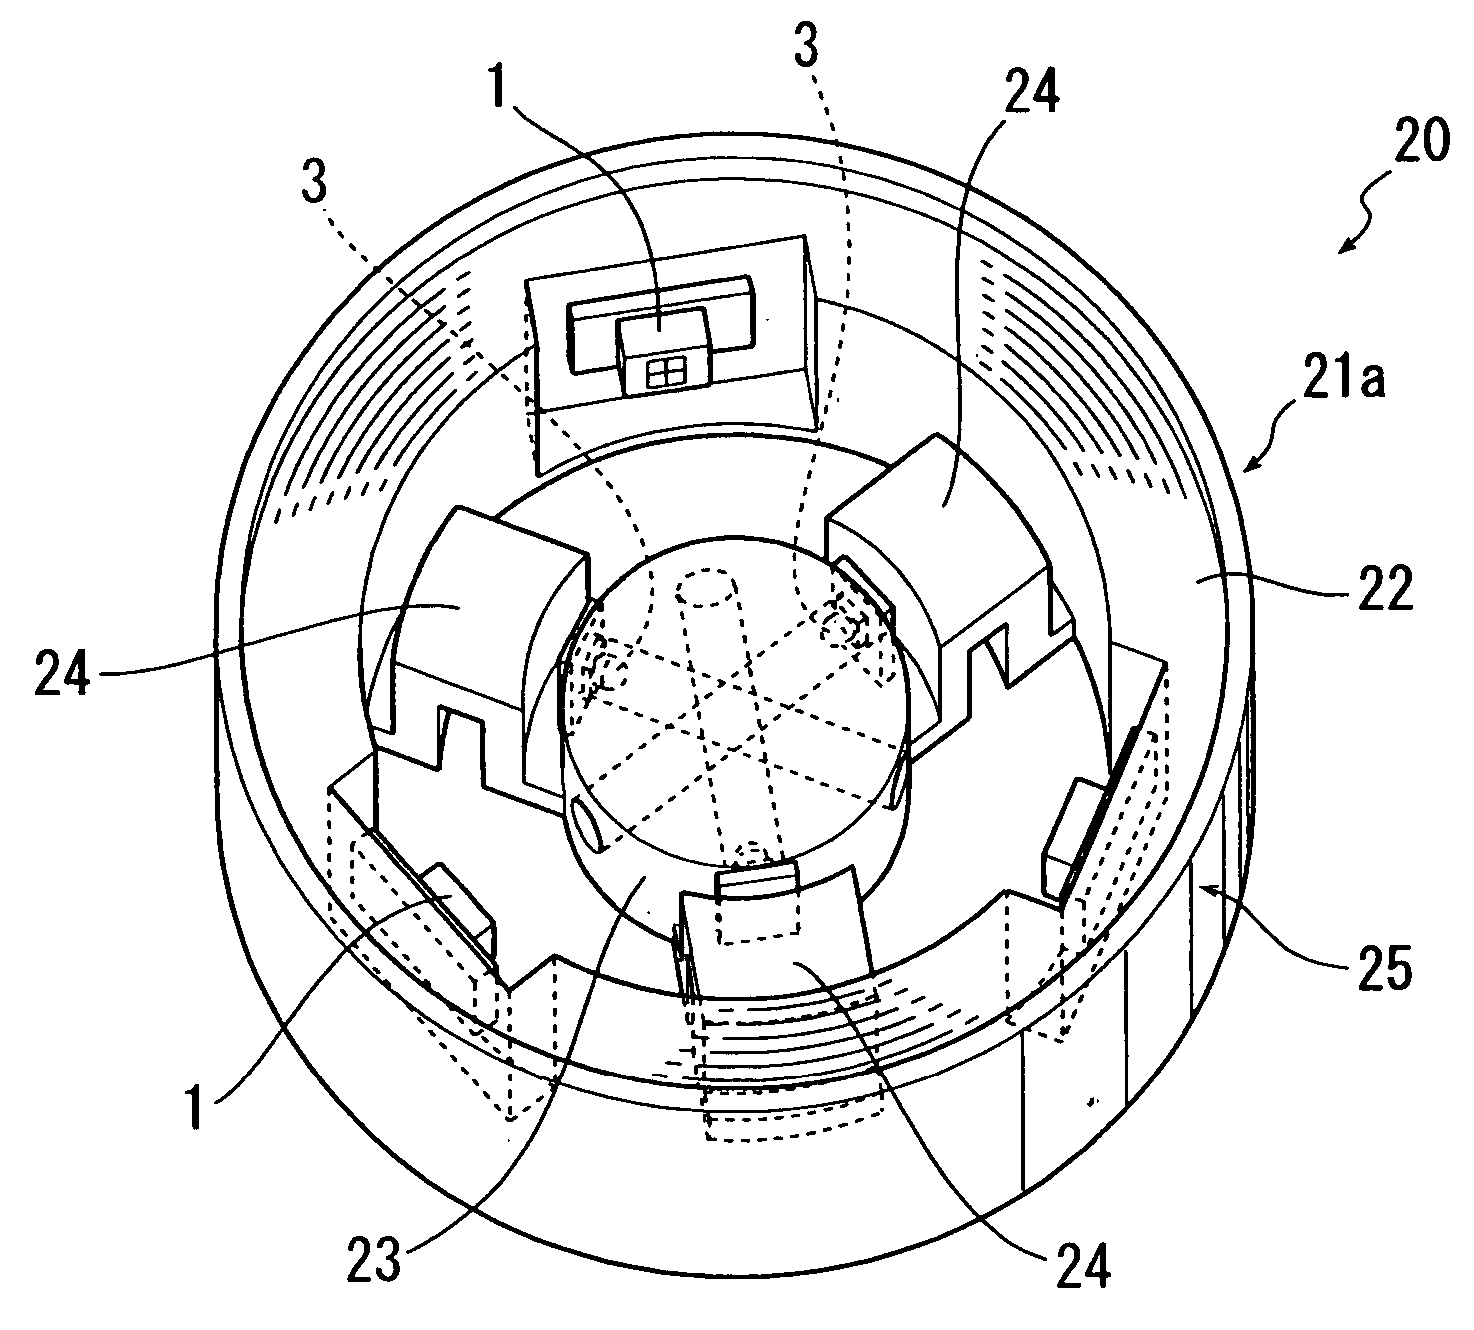 External force detecting device